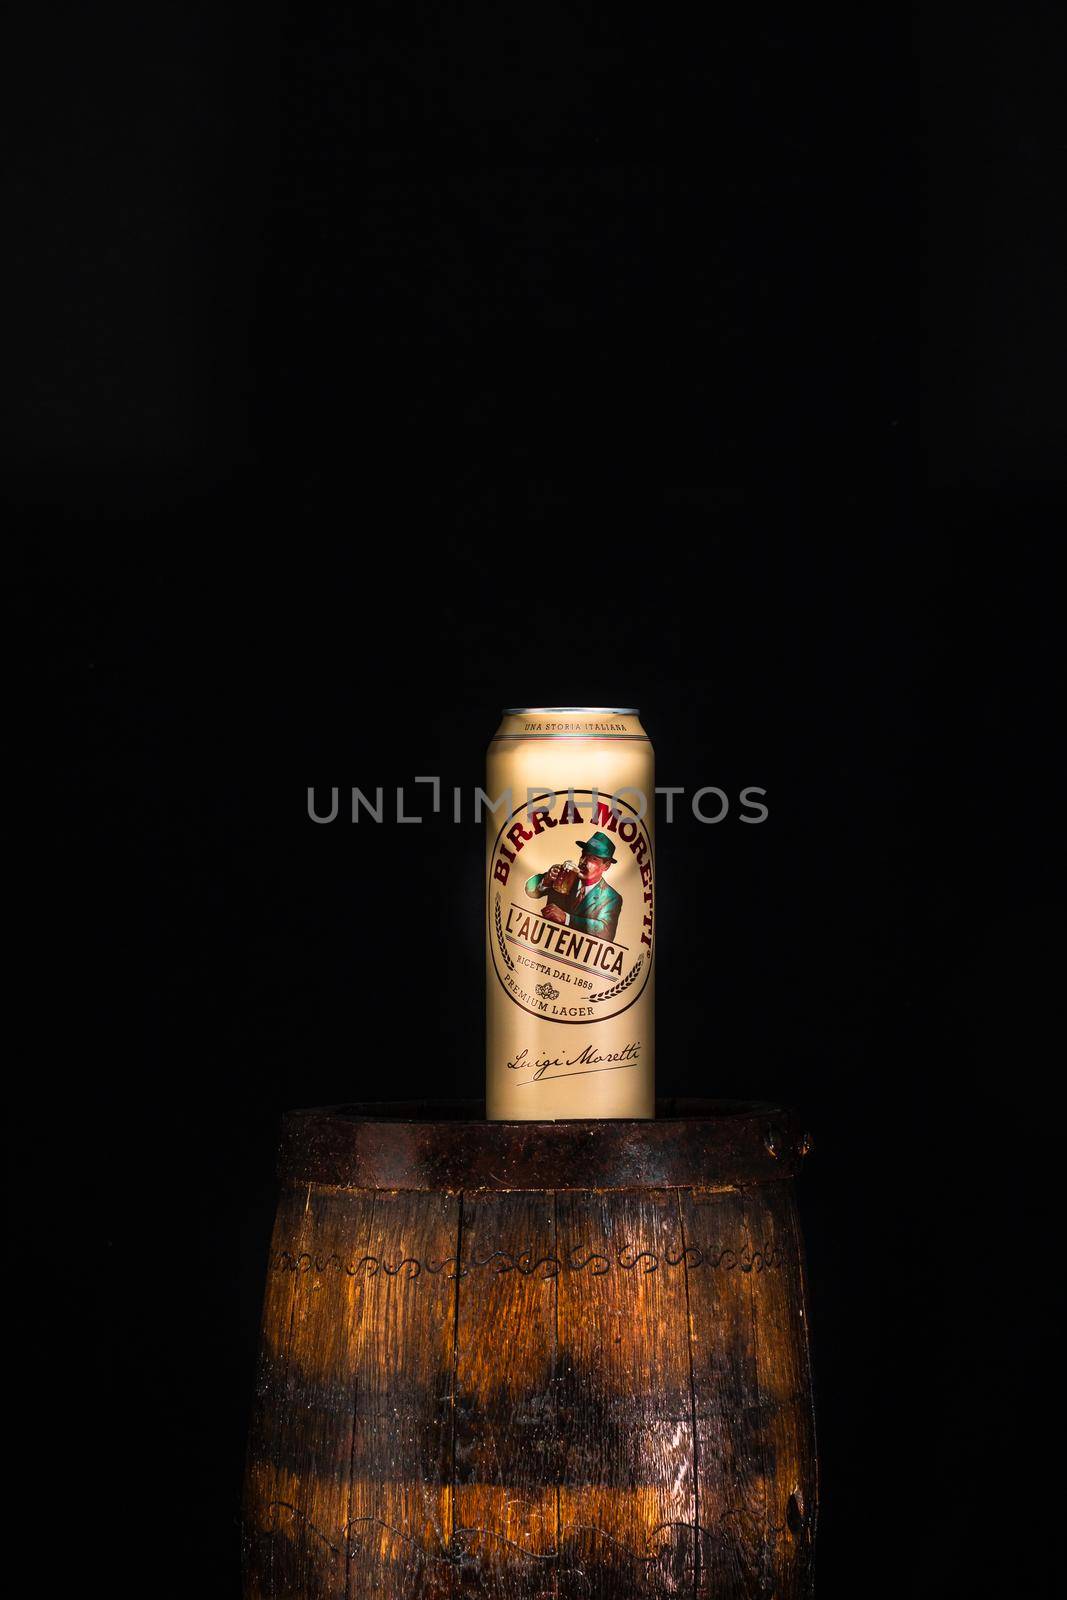 Can of Birra Moretti beer on wooden barrel with dark background. Illustrative editorial photo Bucharest, Romania, 2021